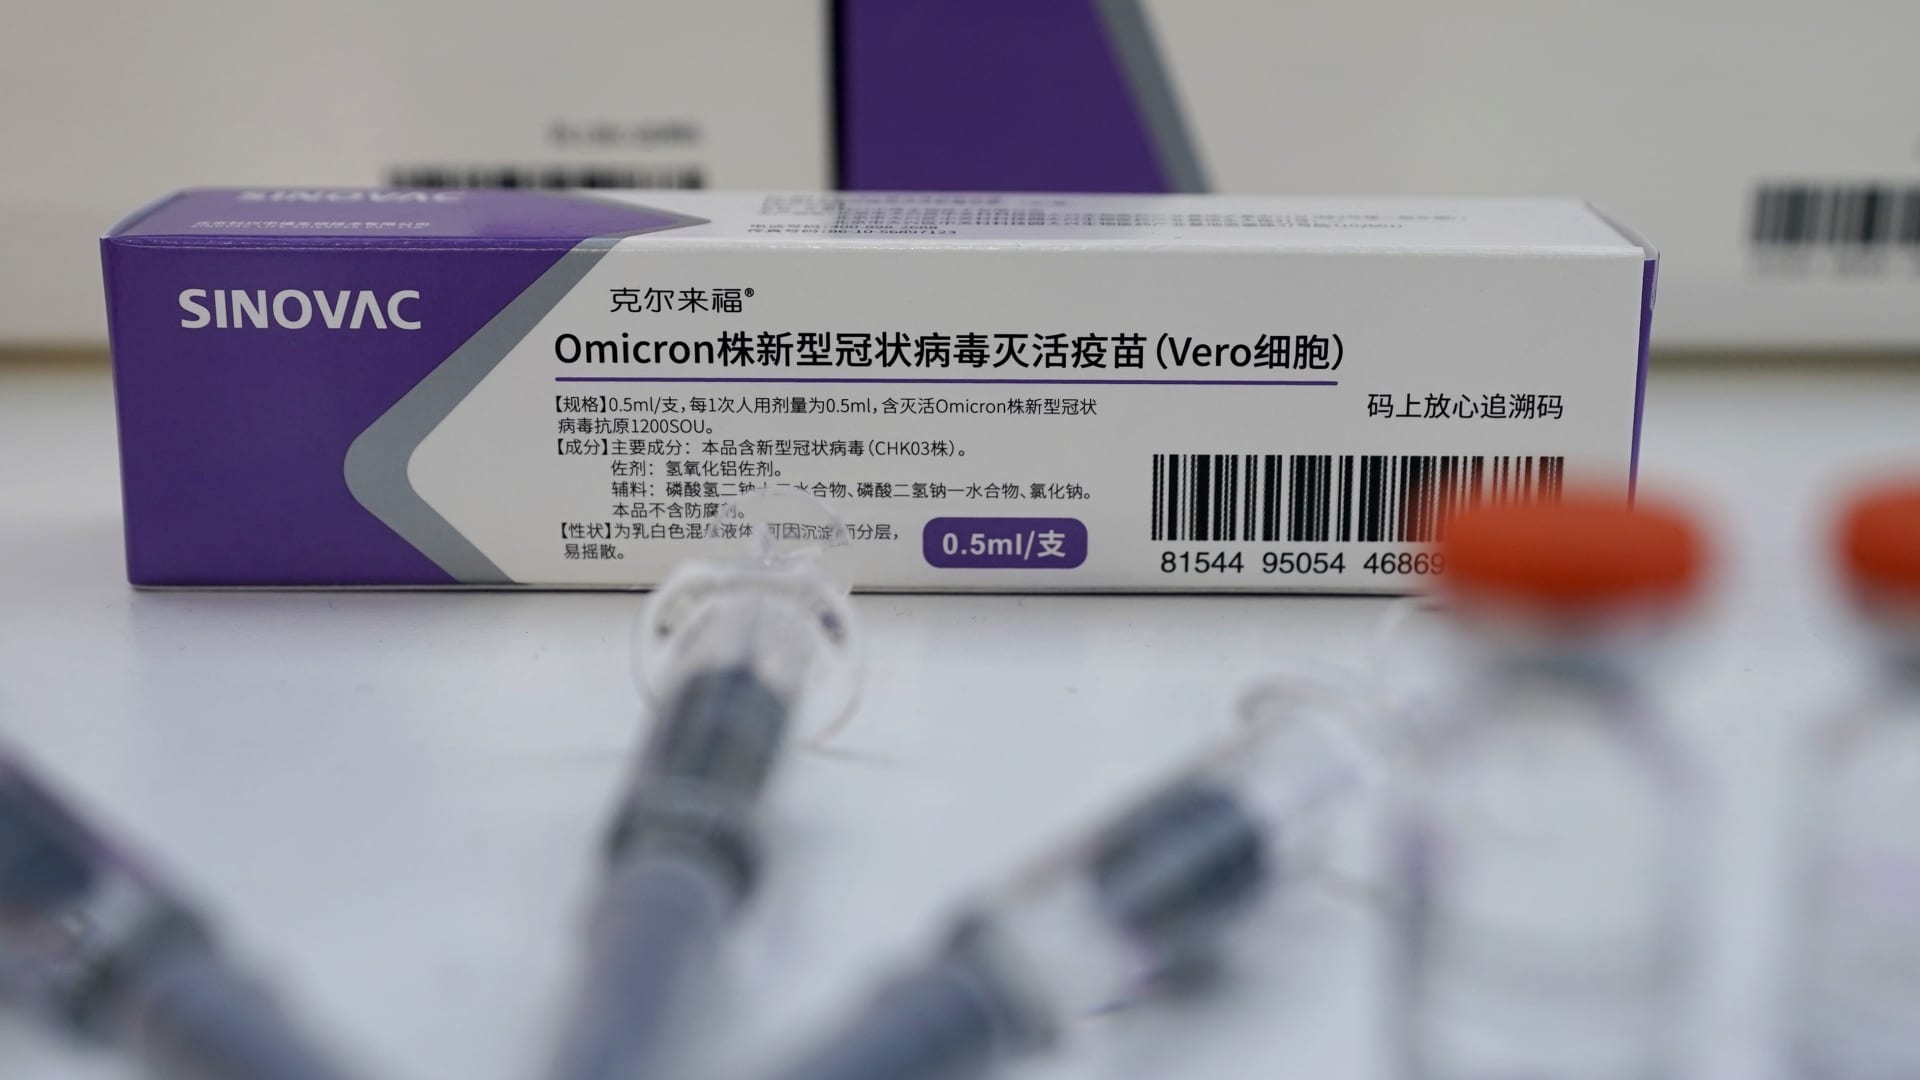 China ought to put aside political points on vaccine imports, CEO says